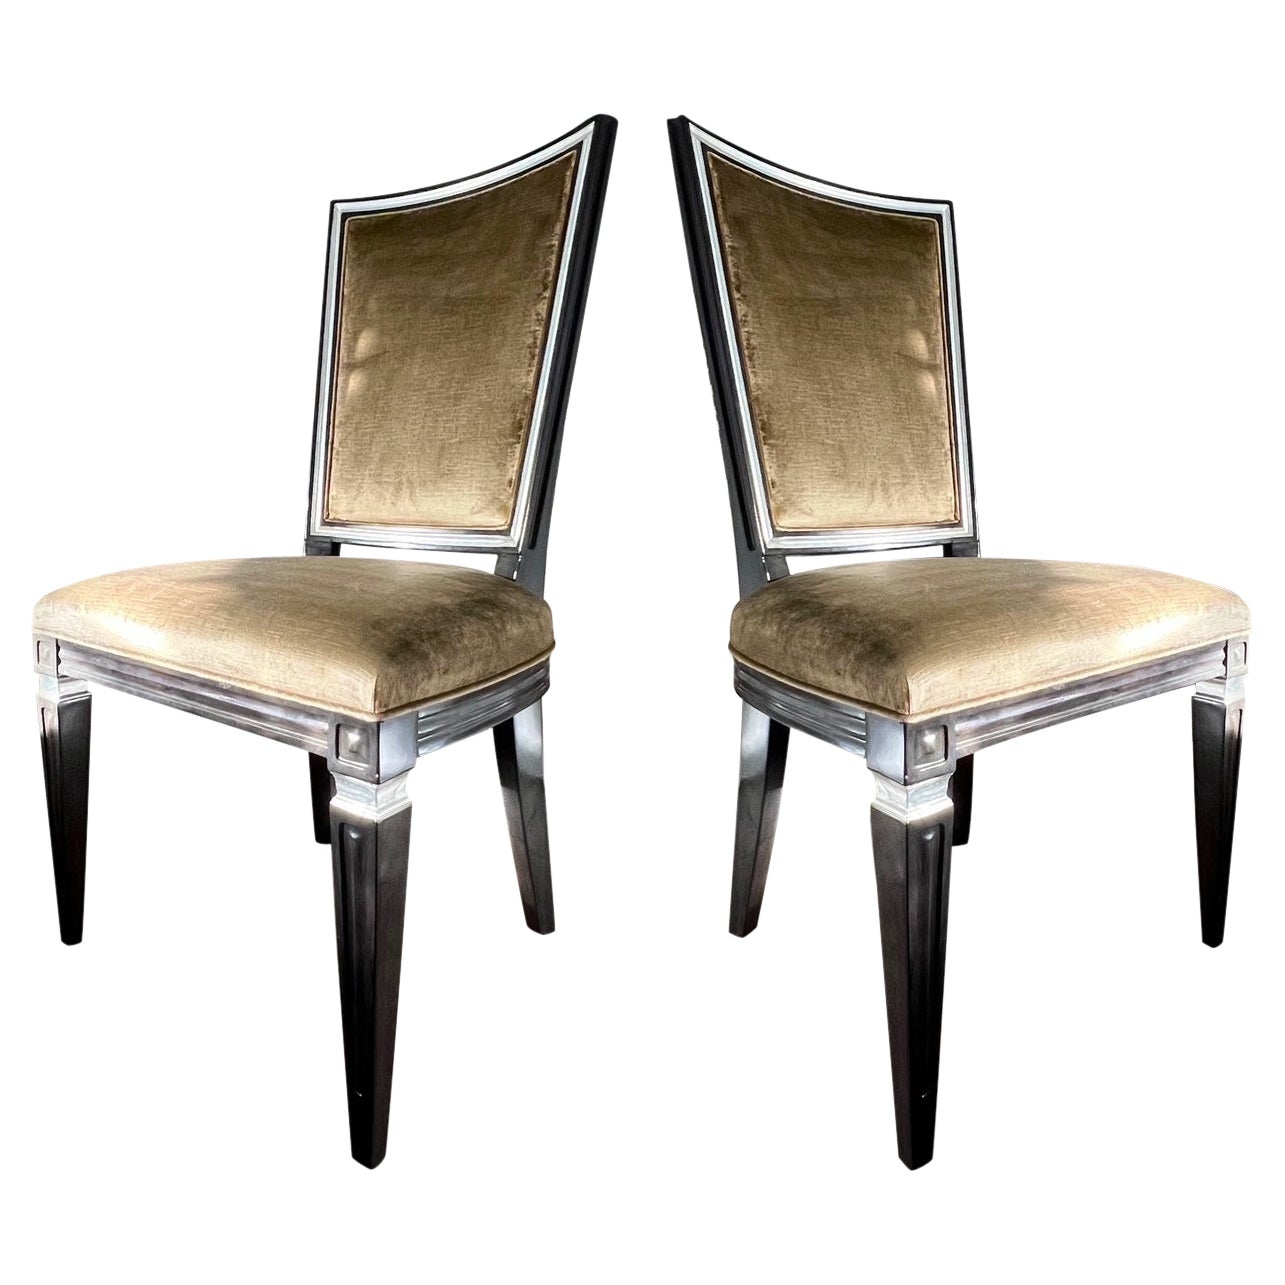 Pair of Neoclassical High Back Chairs in Crushed Velvet and Ebony, c. 1940's